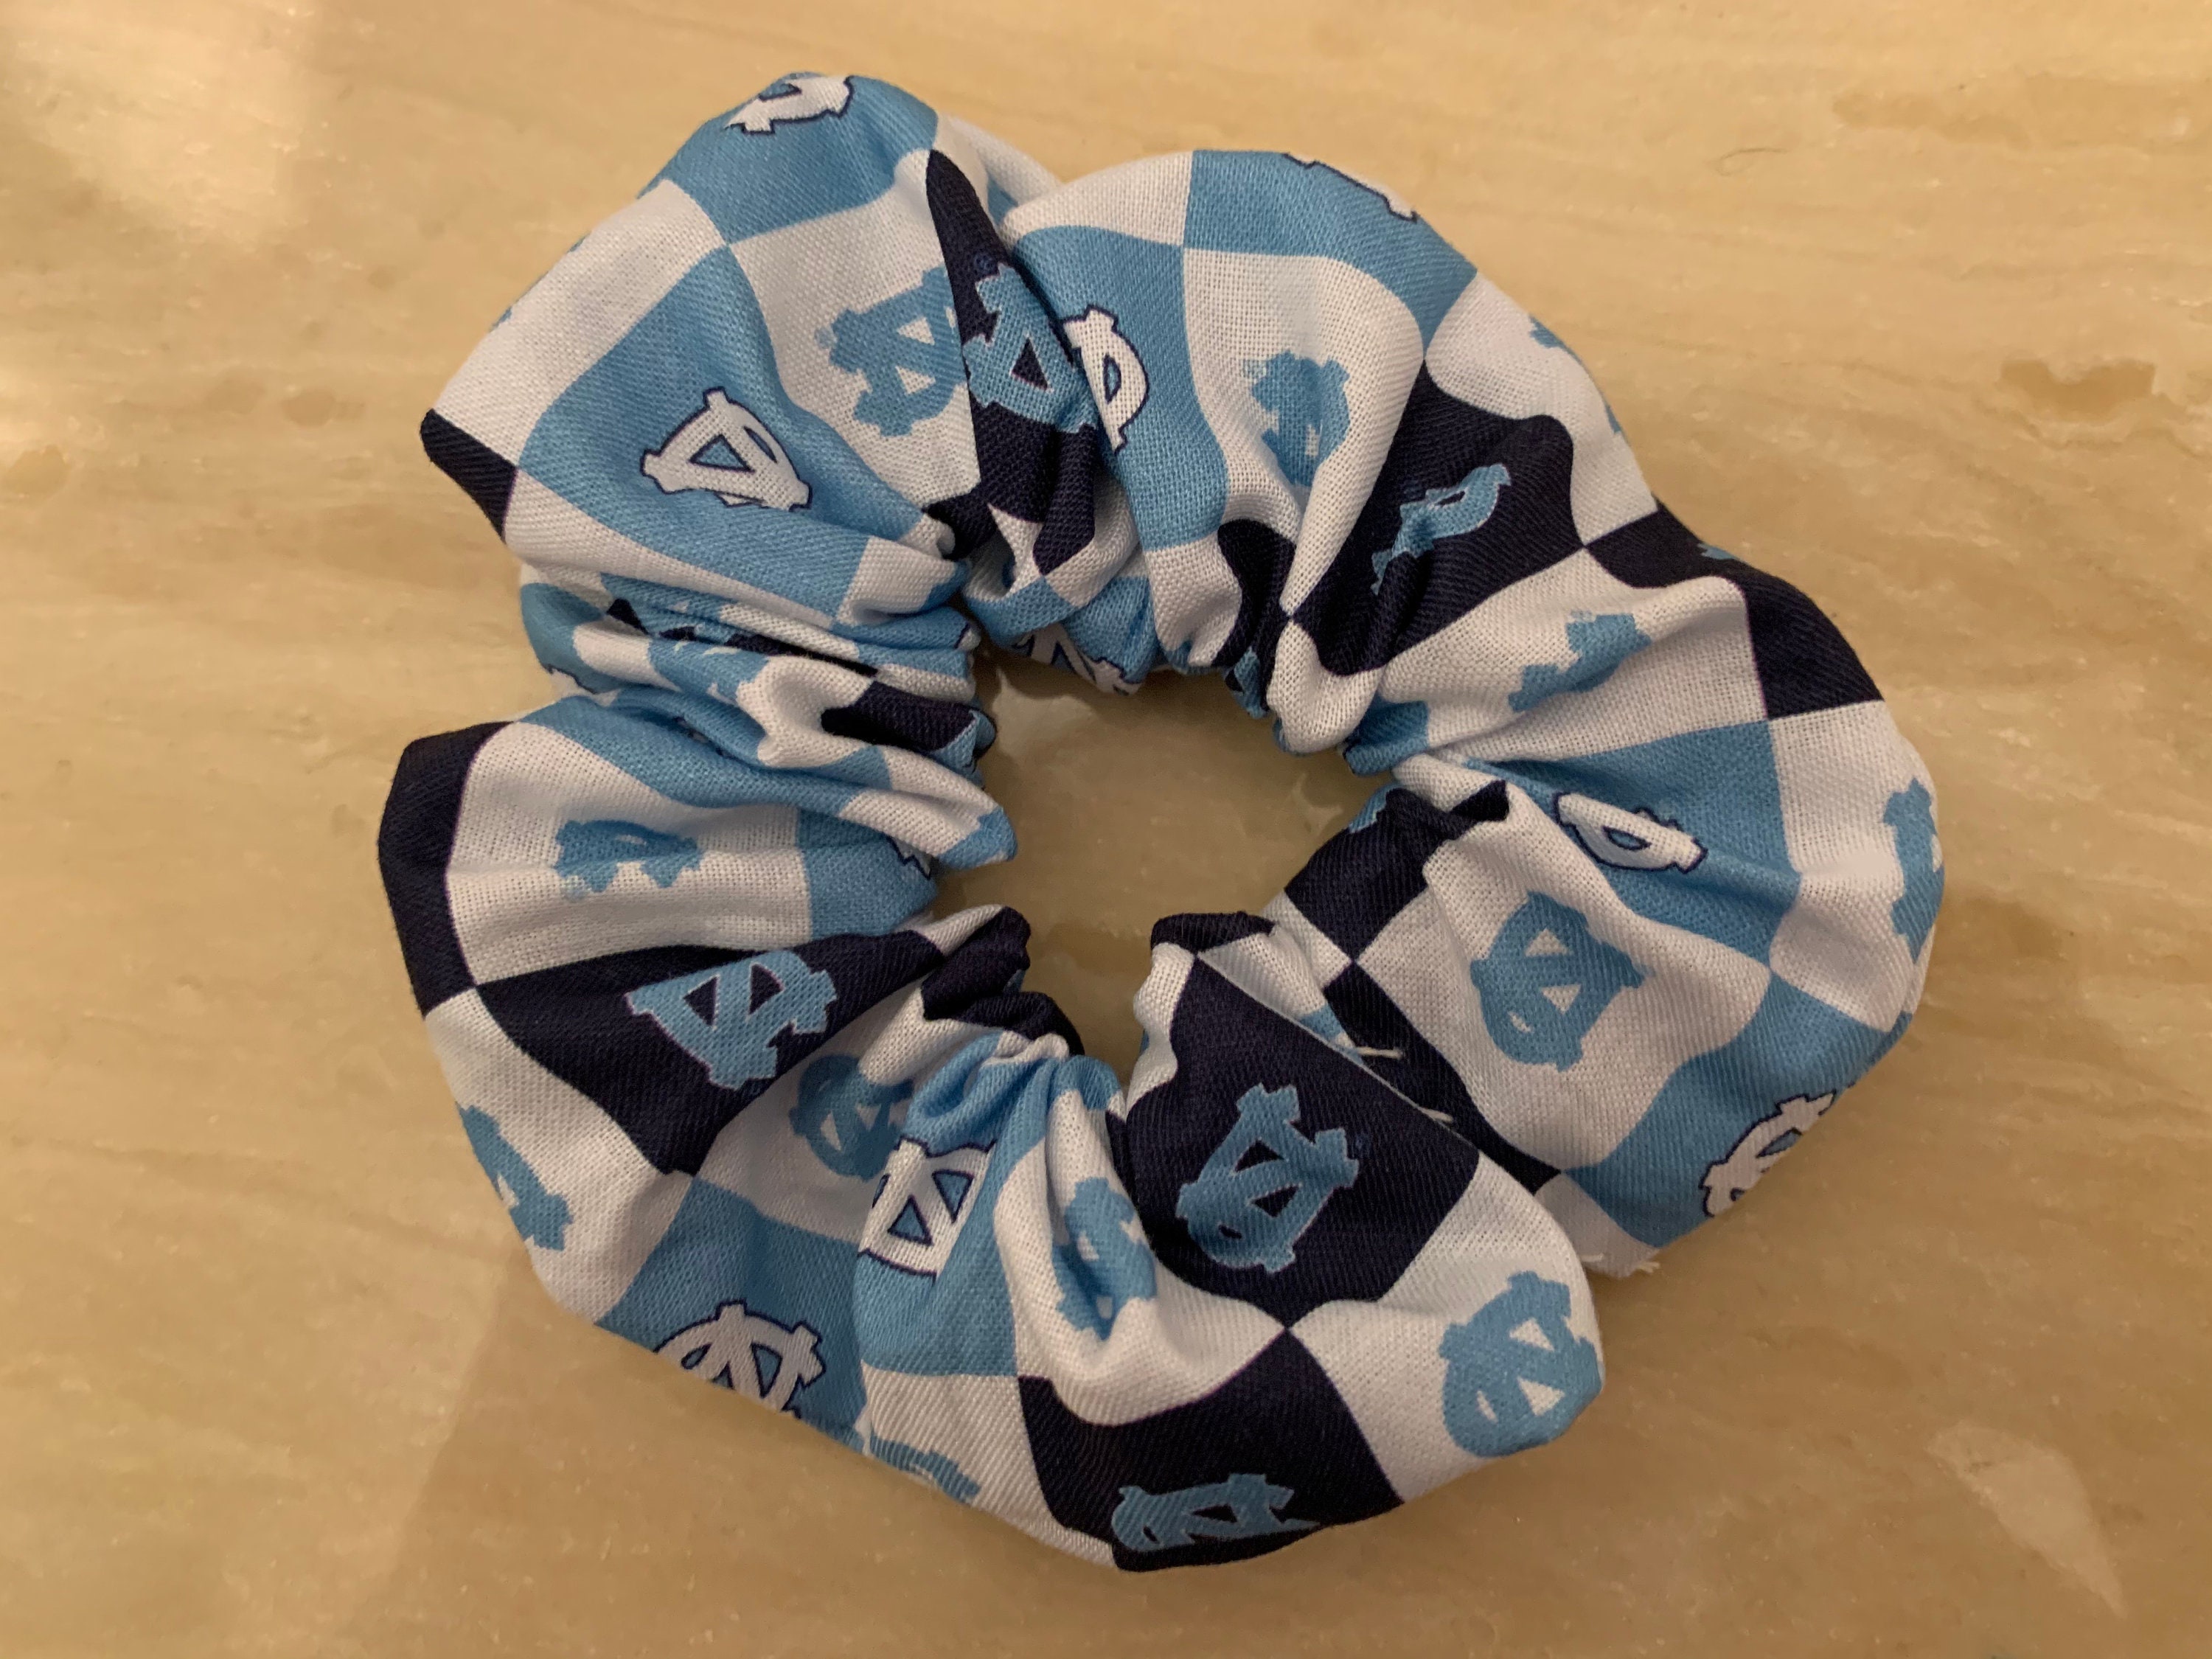 UNC North Carolina Scrunchies not a Licensed NCAA Product - Etsy